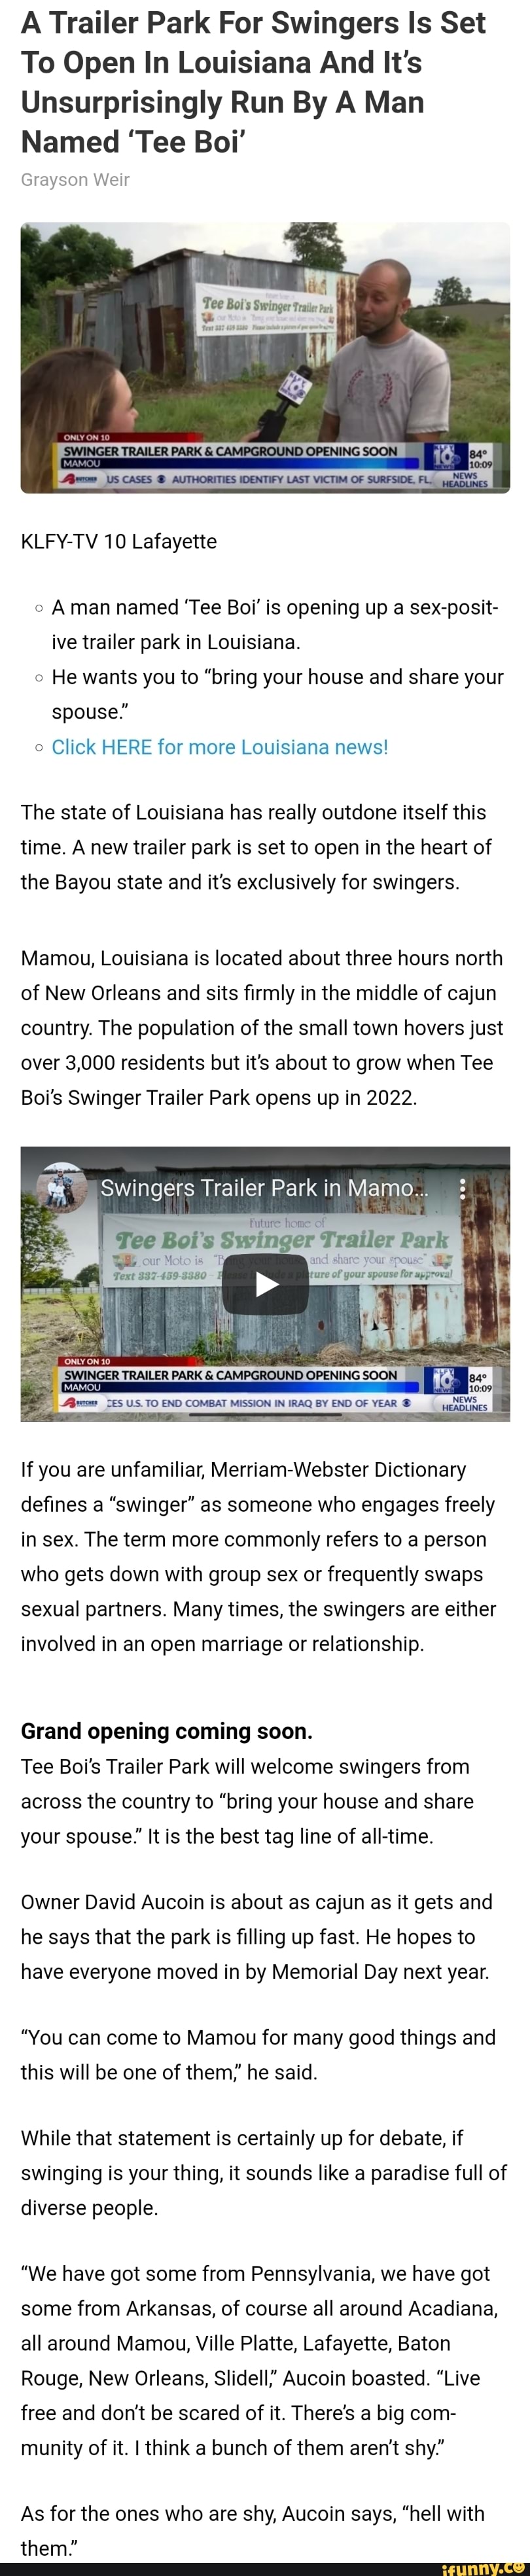 A Trailer Park For Swingers Is Set To Open In Louisiana And Its Unsurprisingly Run By pic image